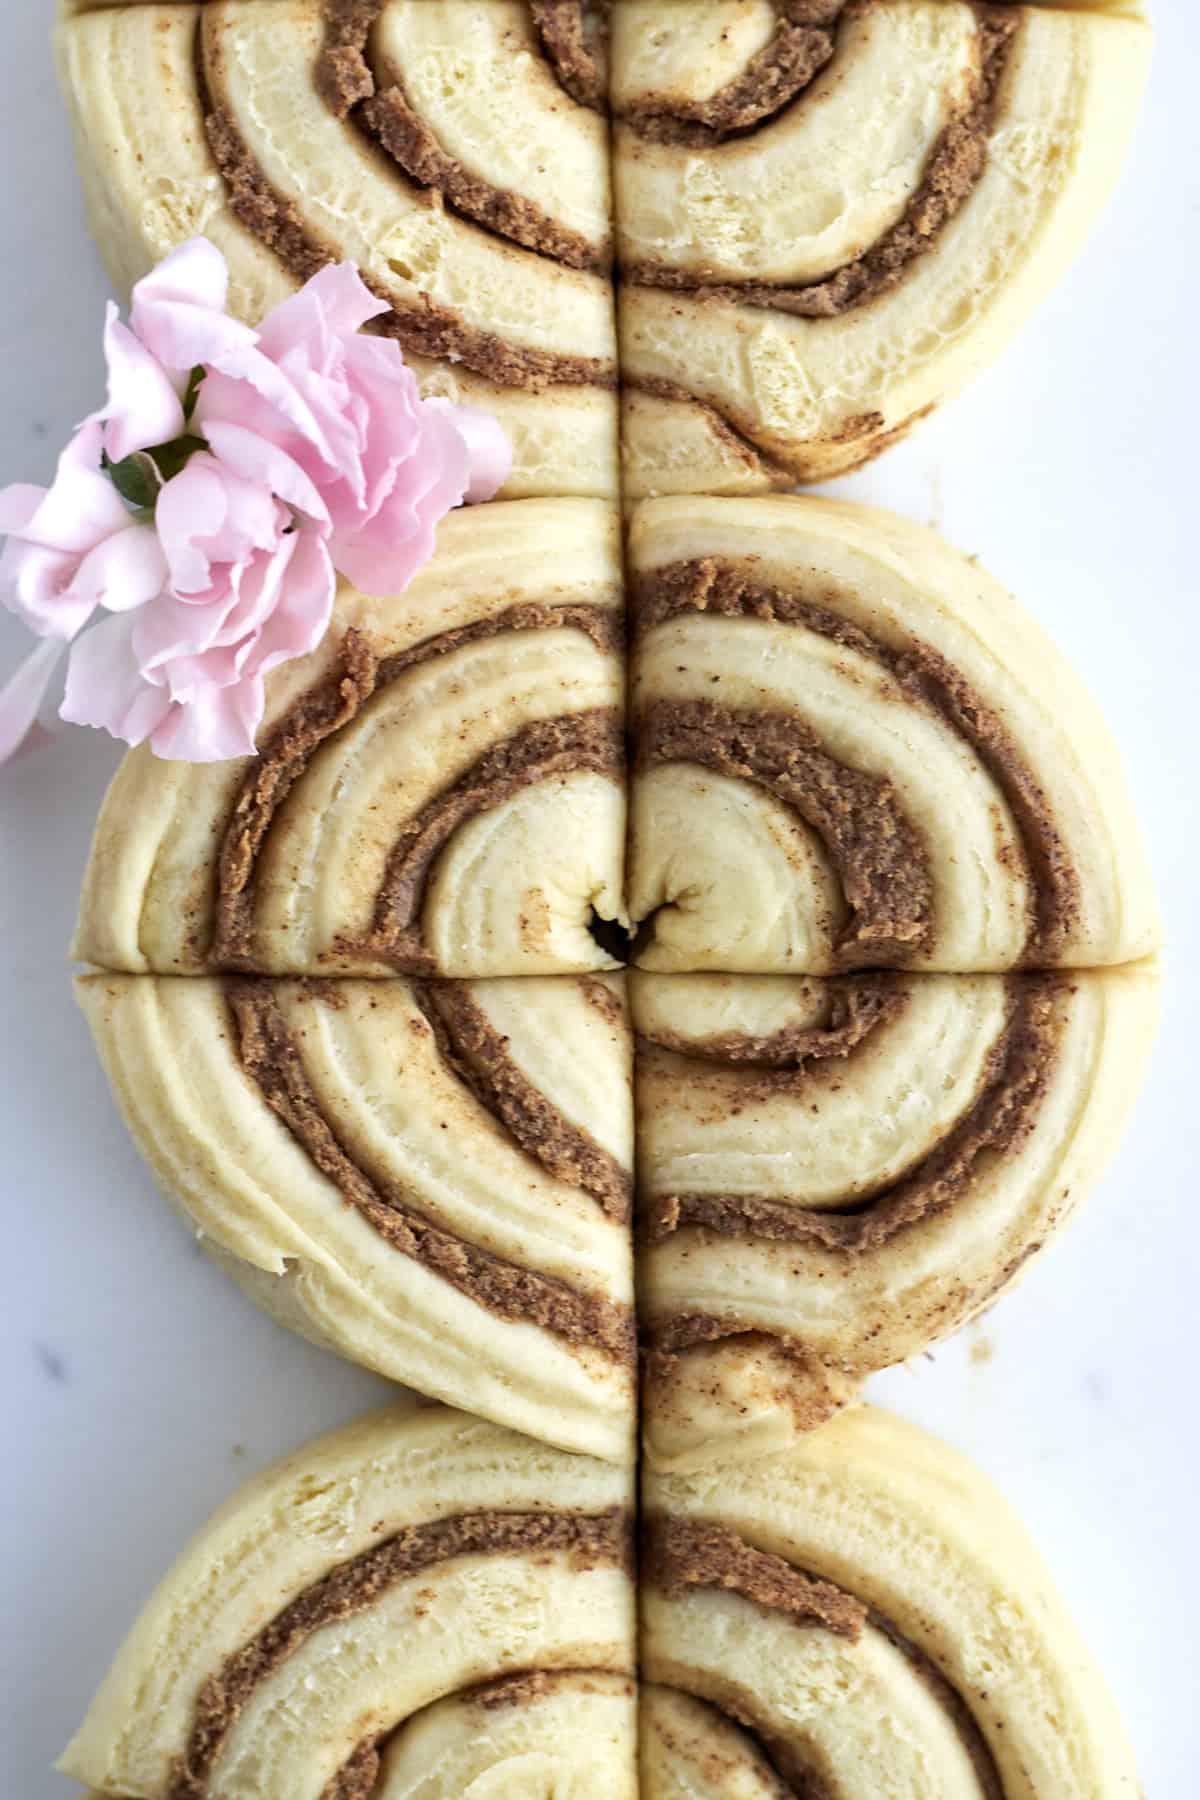 three unbaked cinnamon rolls that have been sliced into quarters